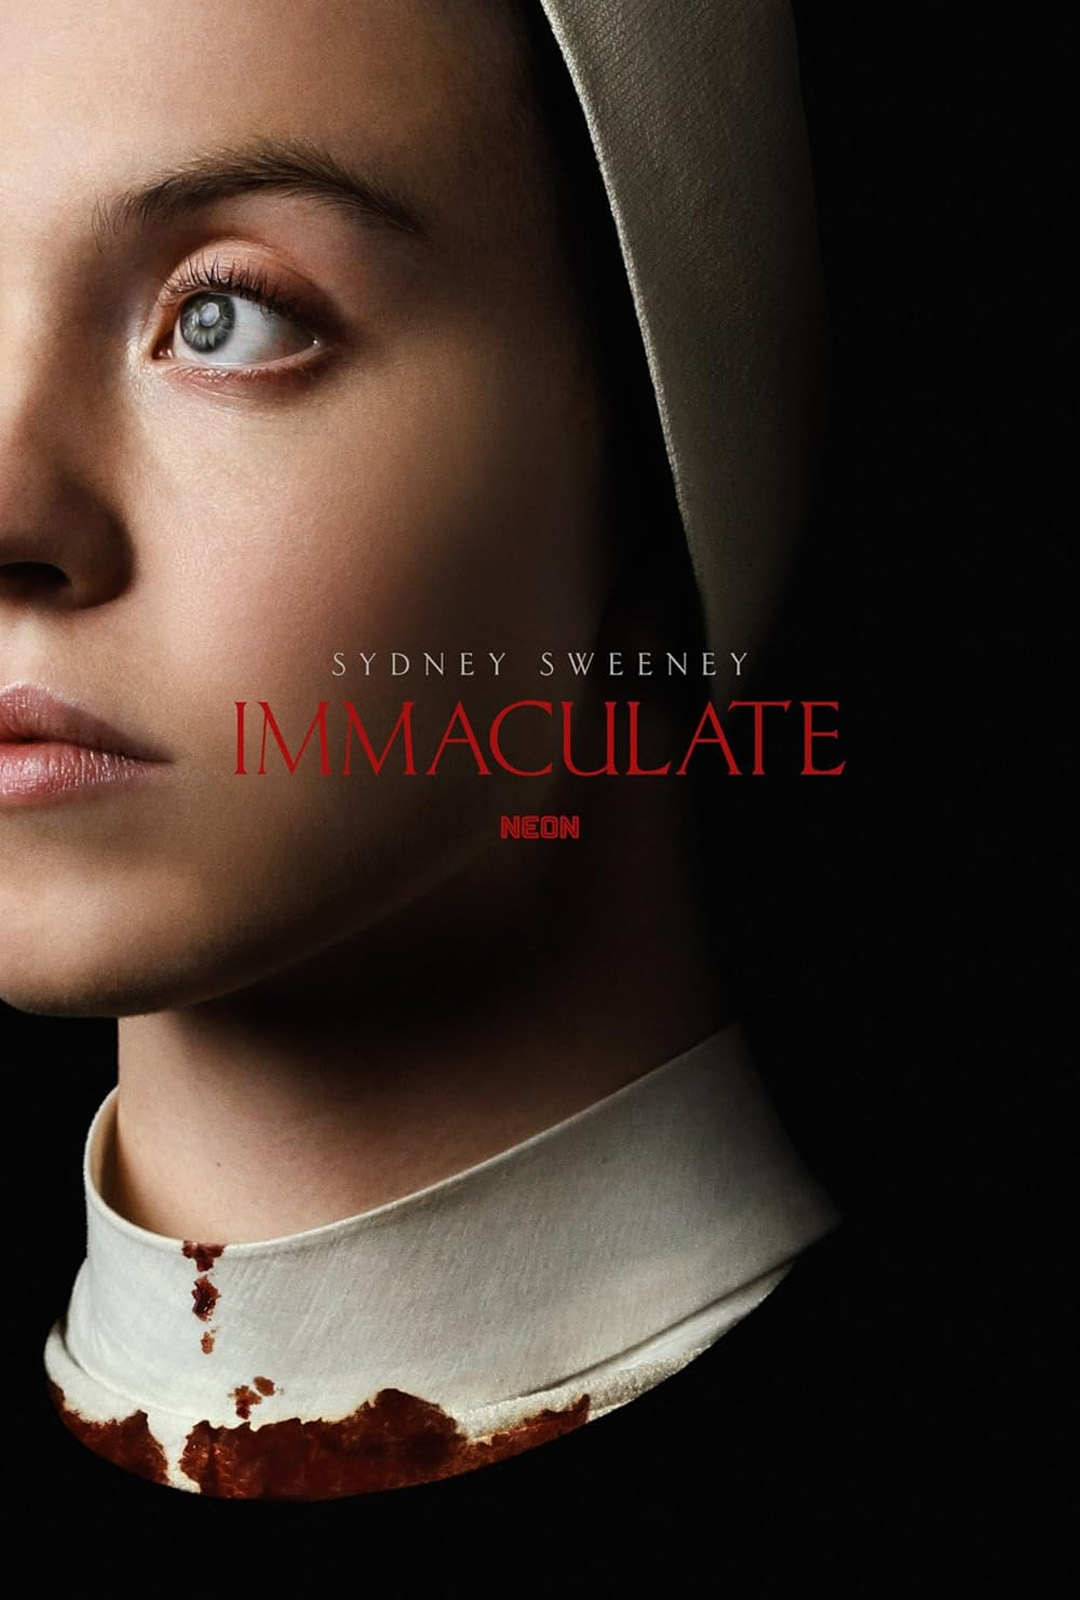 Movie Poster: Immaculate